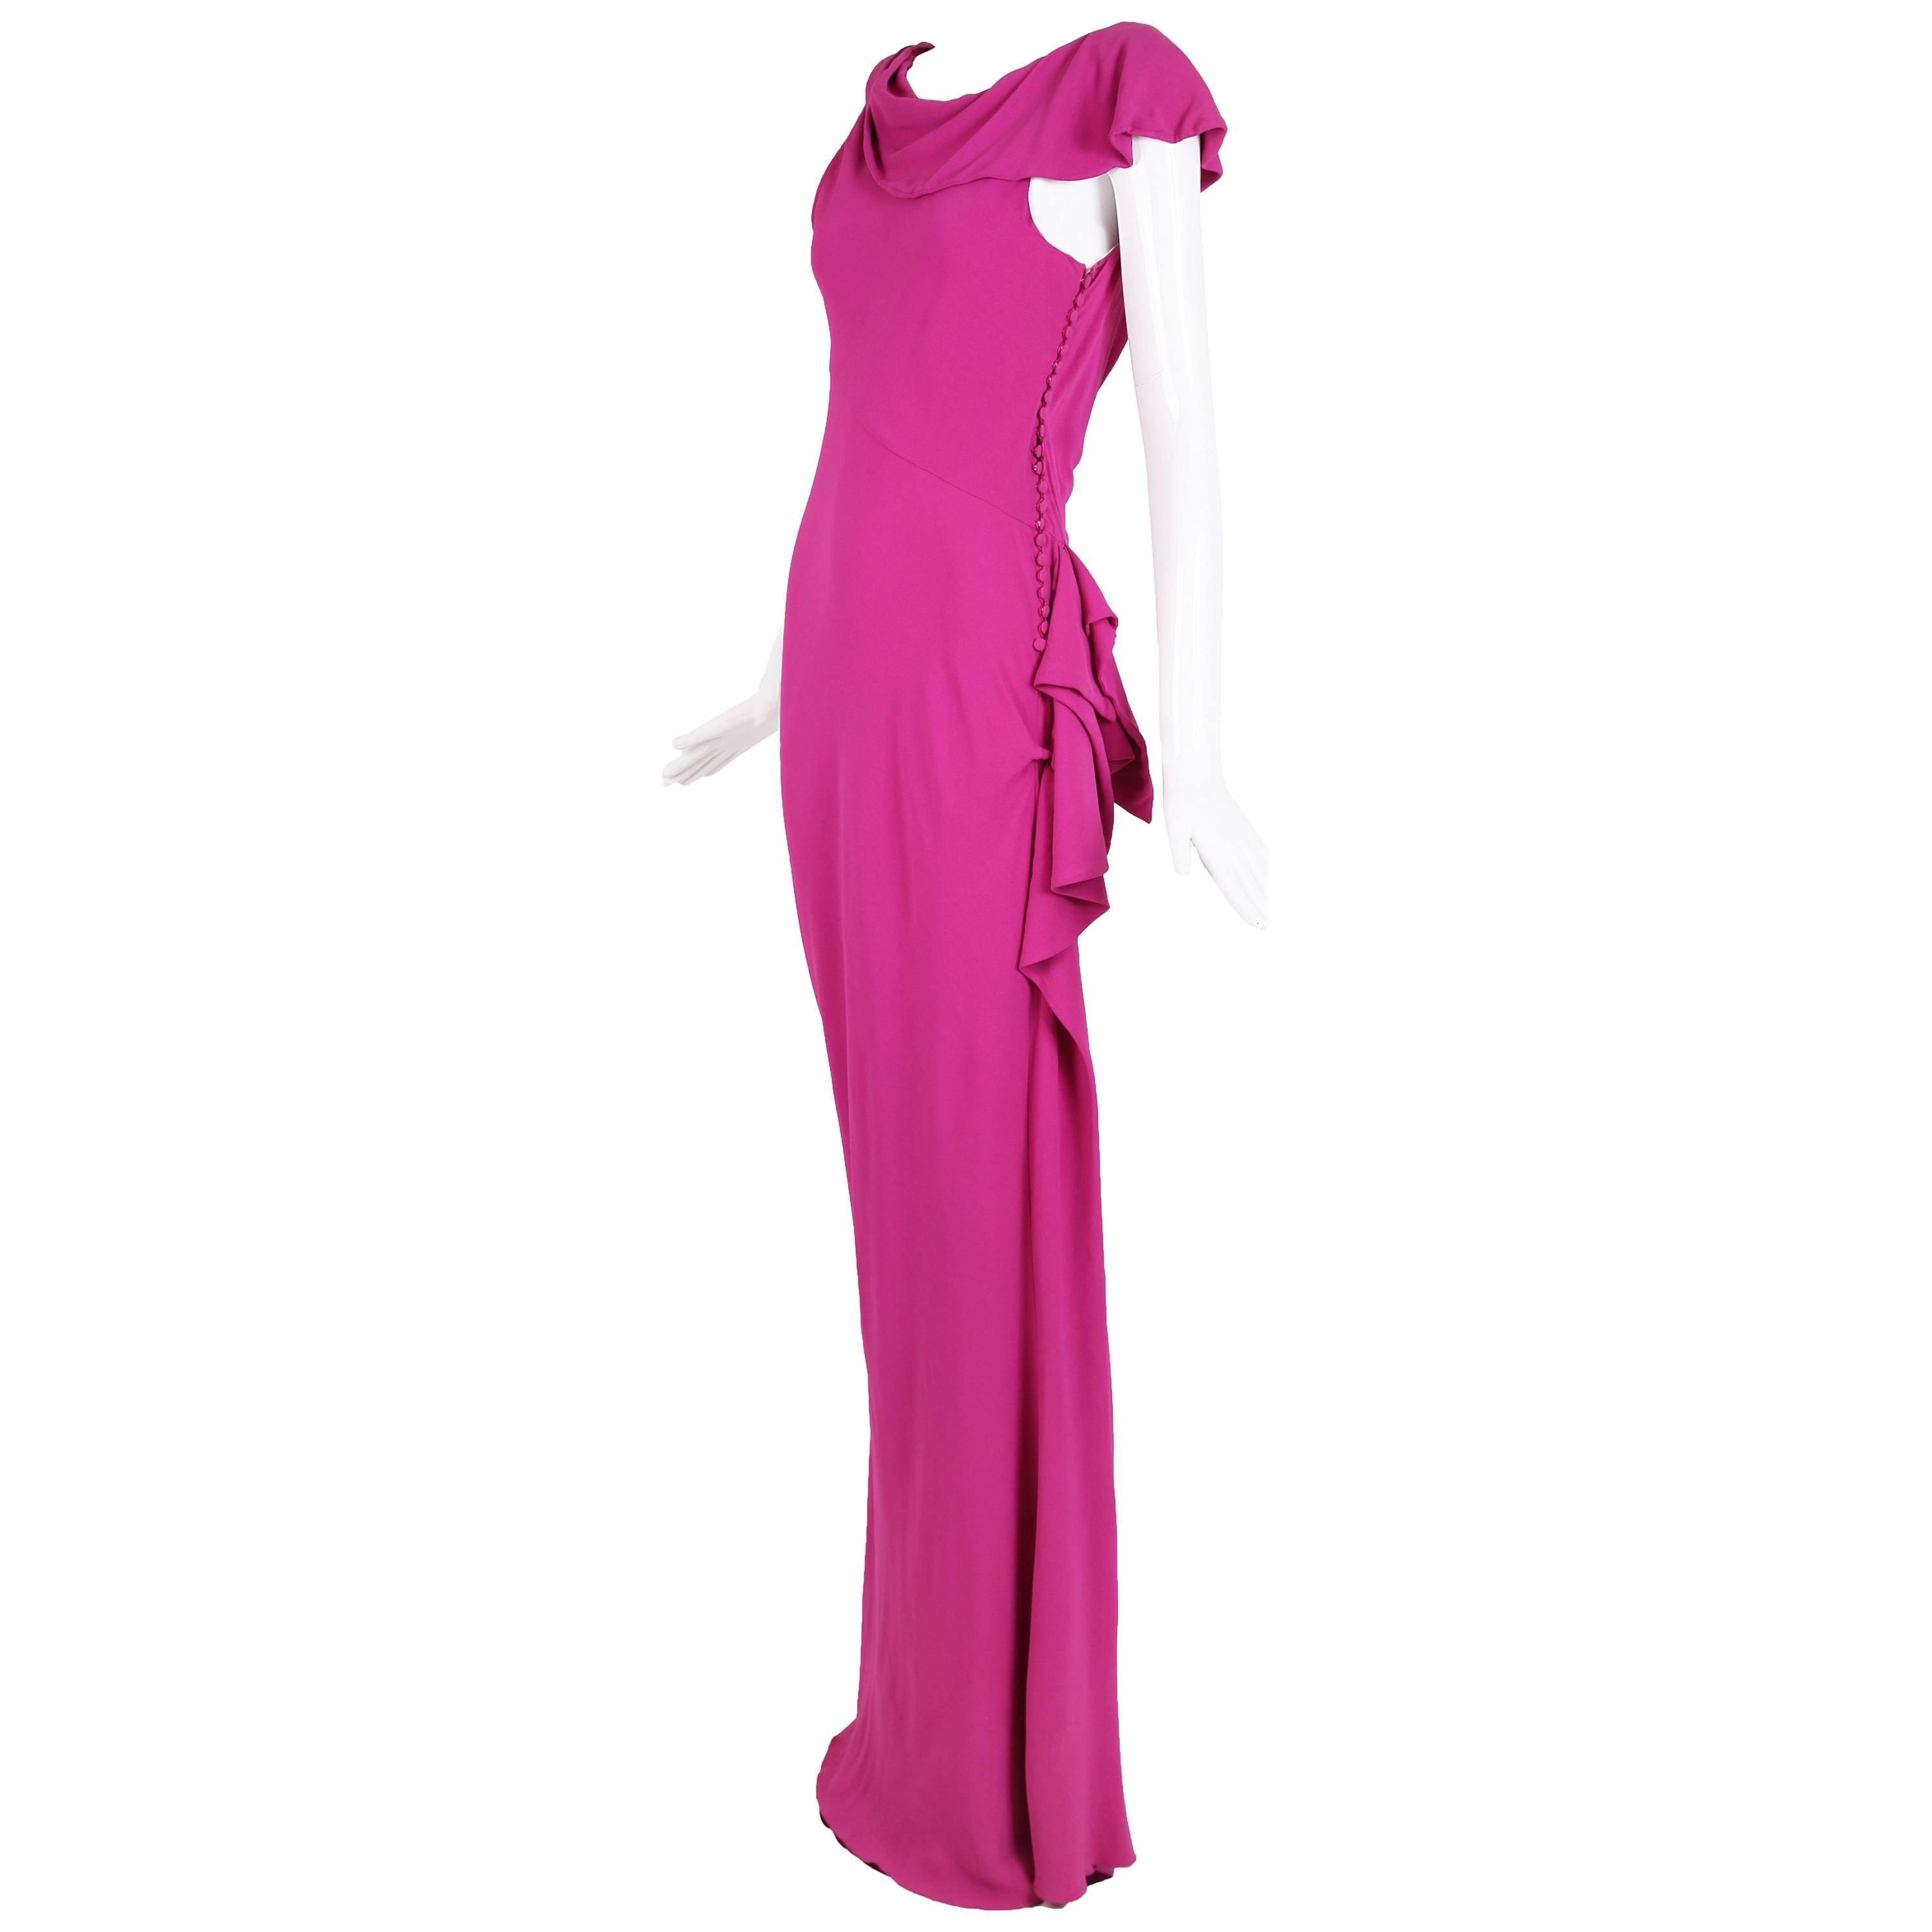 Christian Dior by John Galliano Bias-Cut Pink Crepe Evening Gown